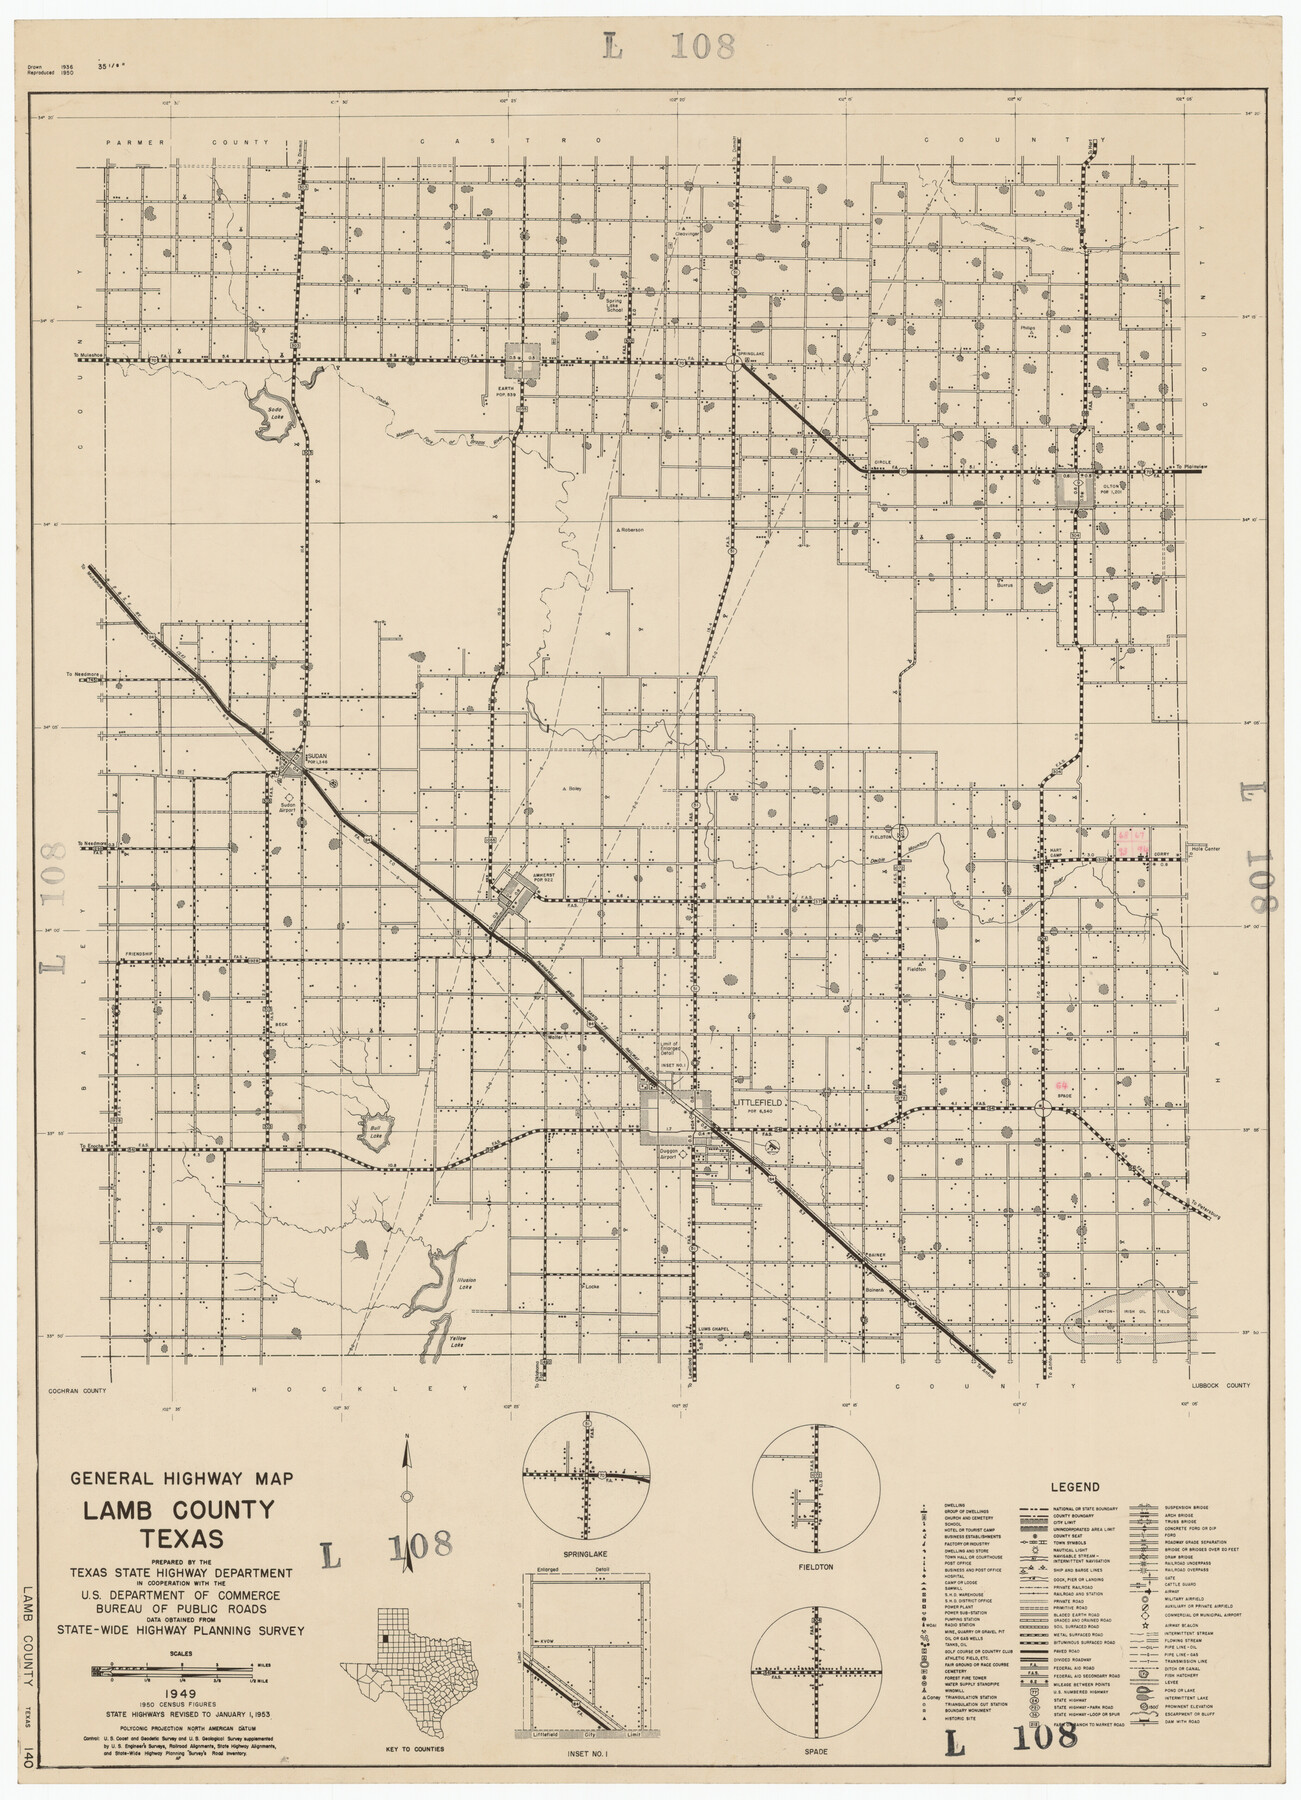 92172, General Highway Map Lamb County, Texas, Twichell Survey Records